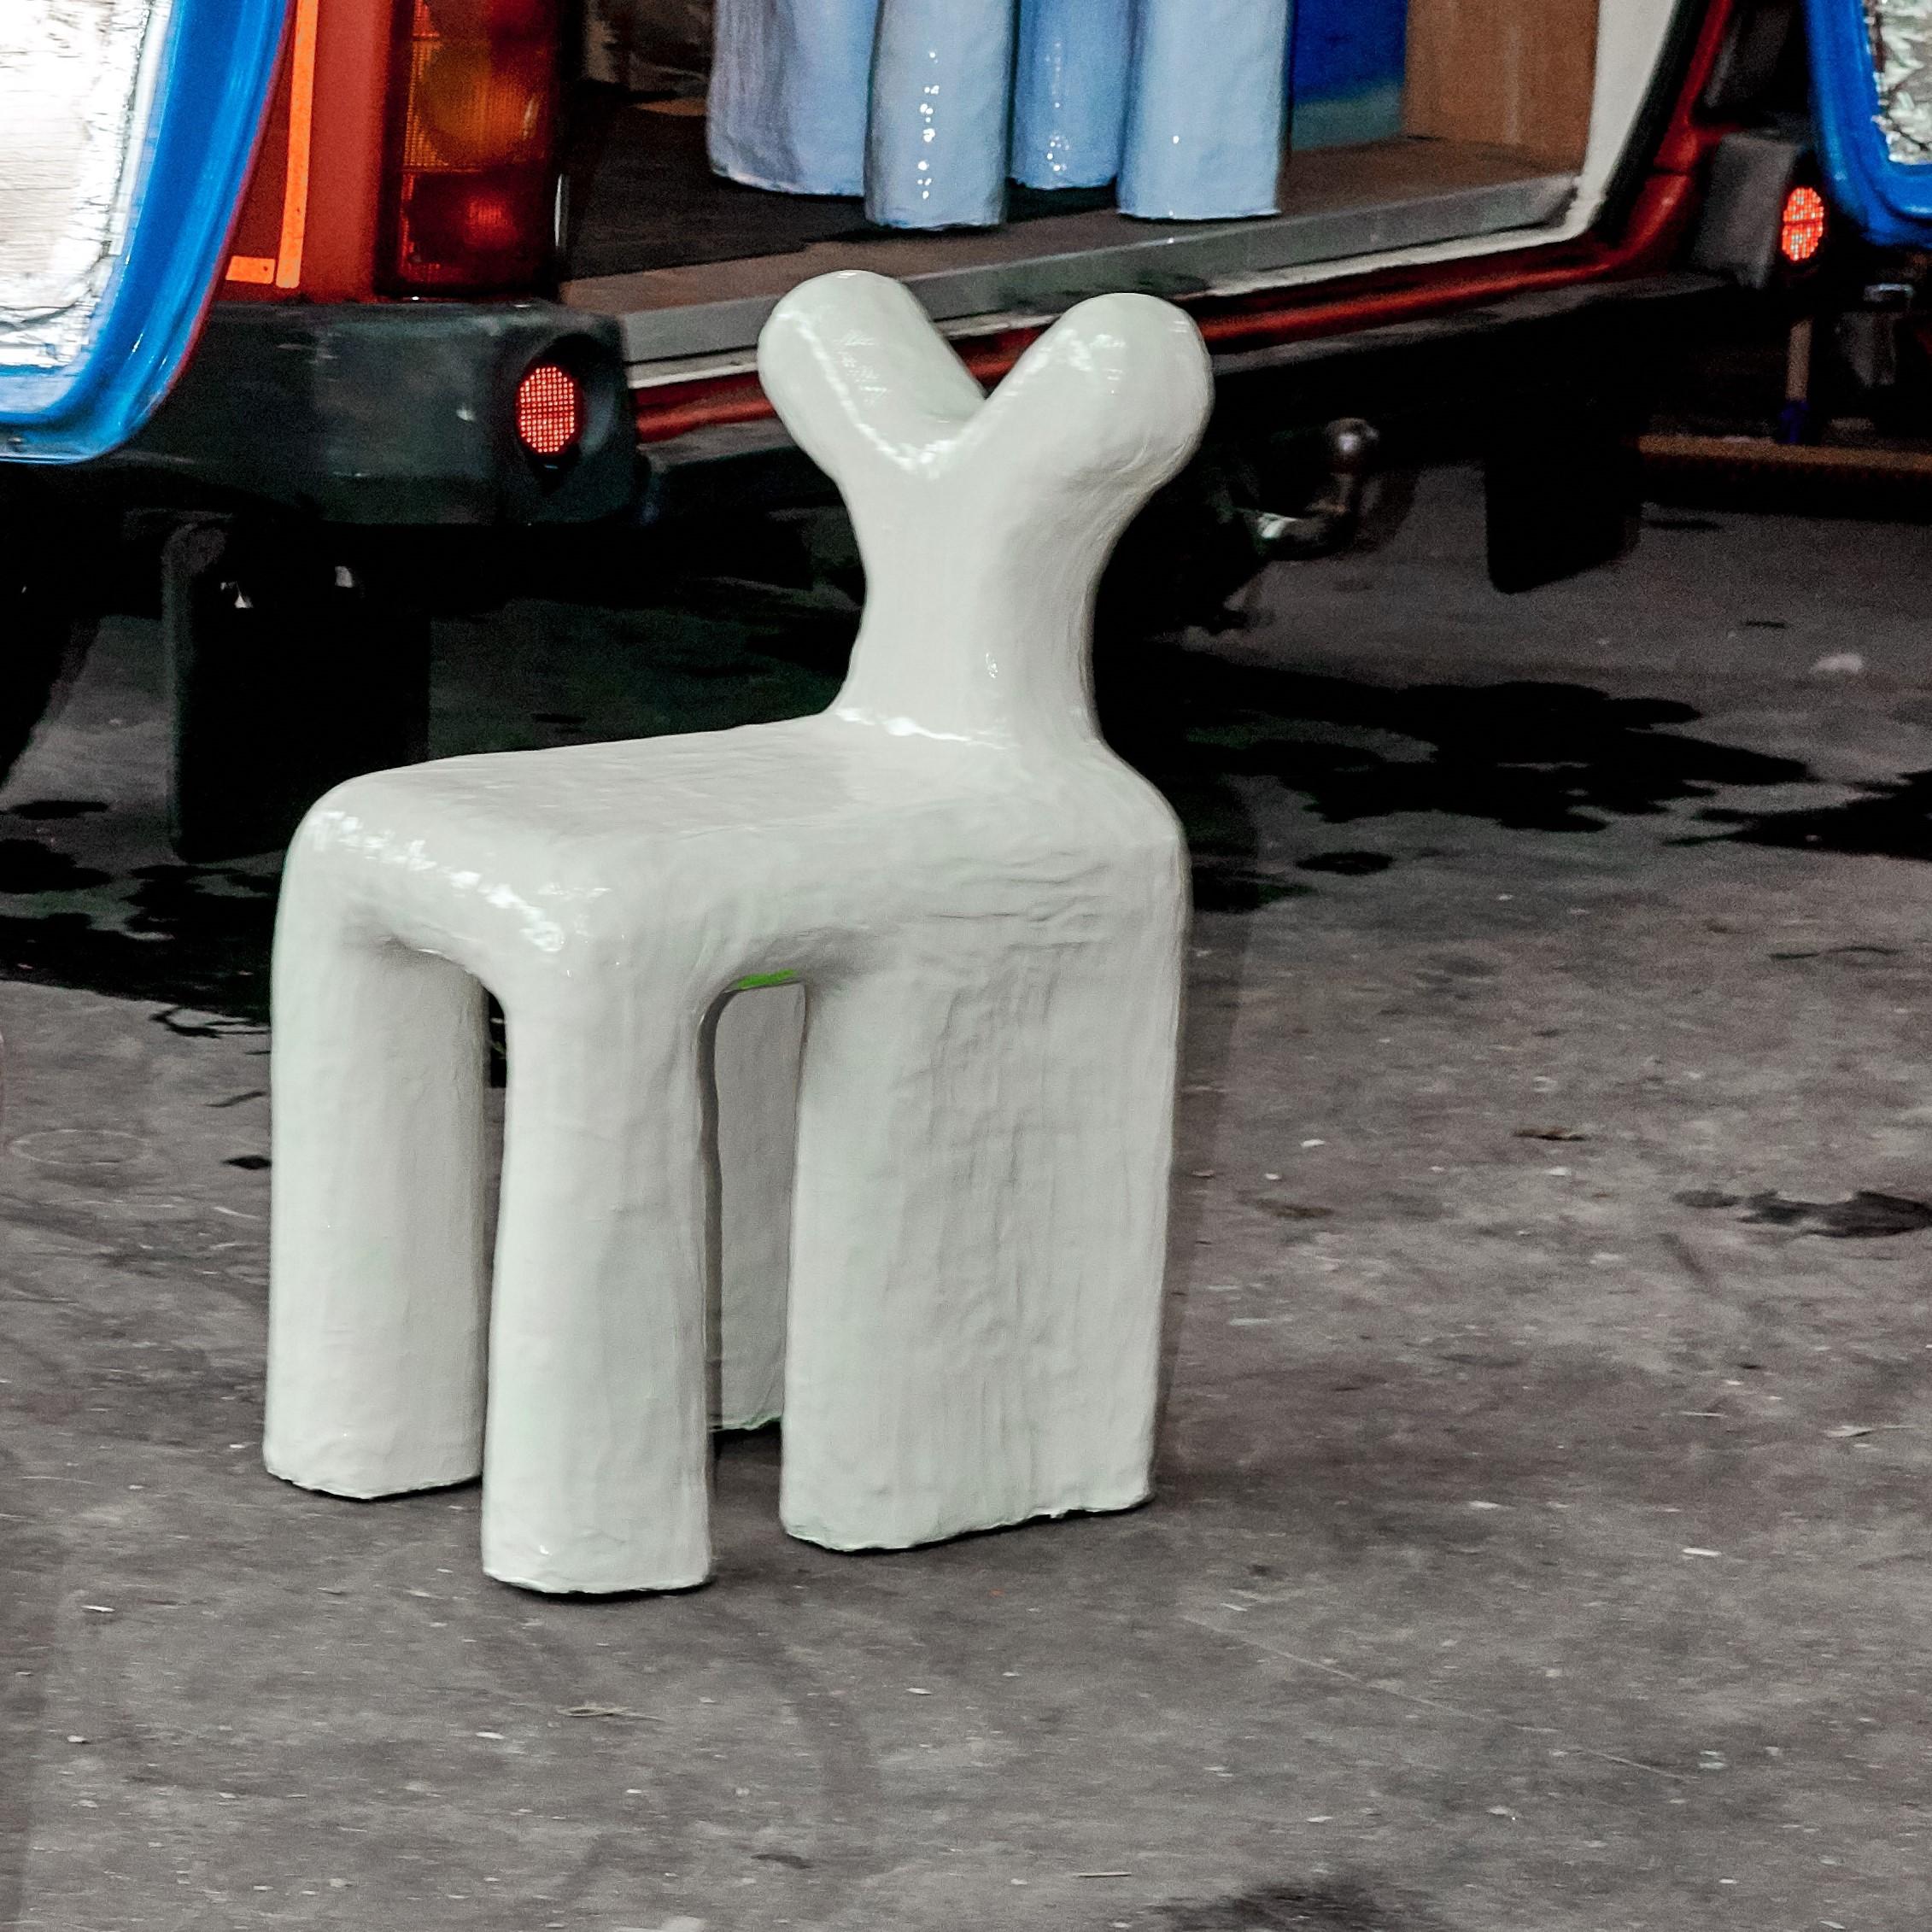 Post-Modern Funky Stool Made in 467 Minutes by Minute Manufacturing